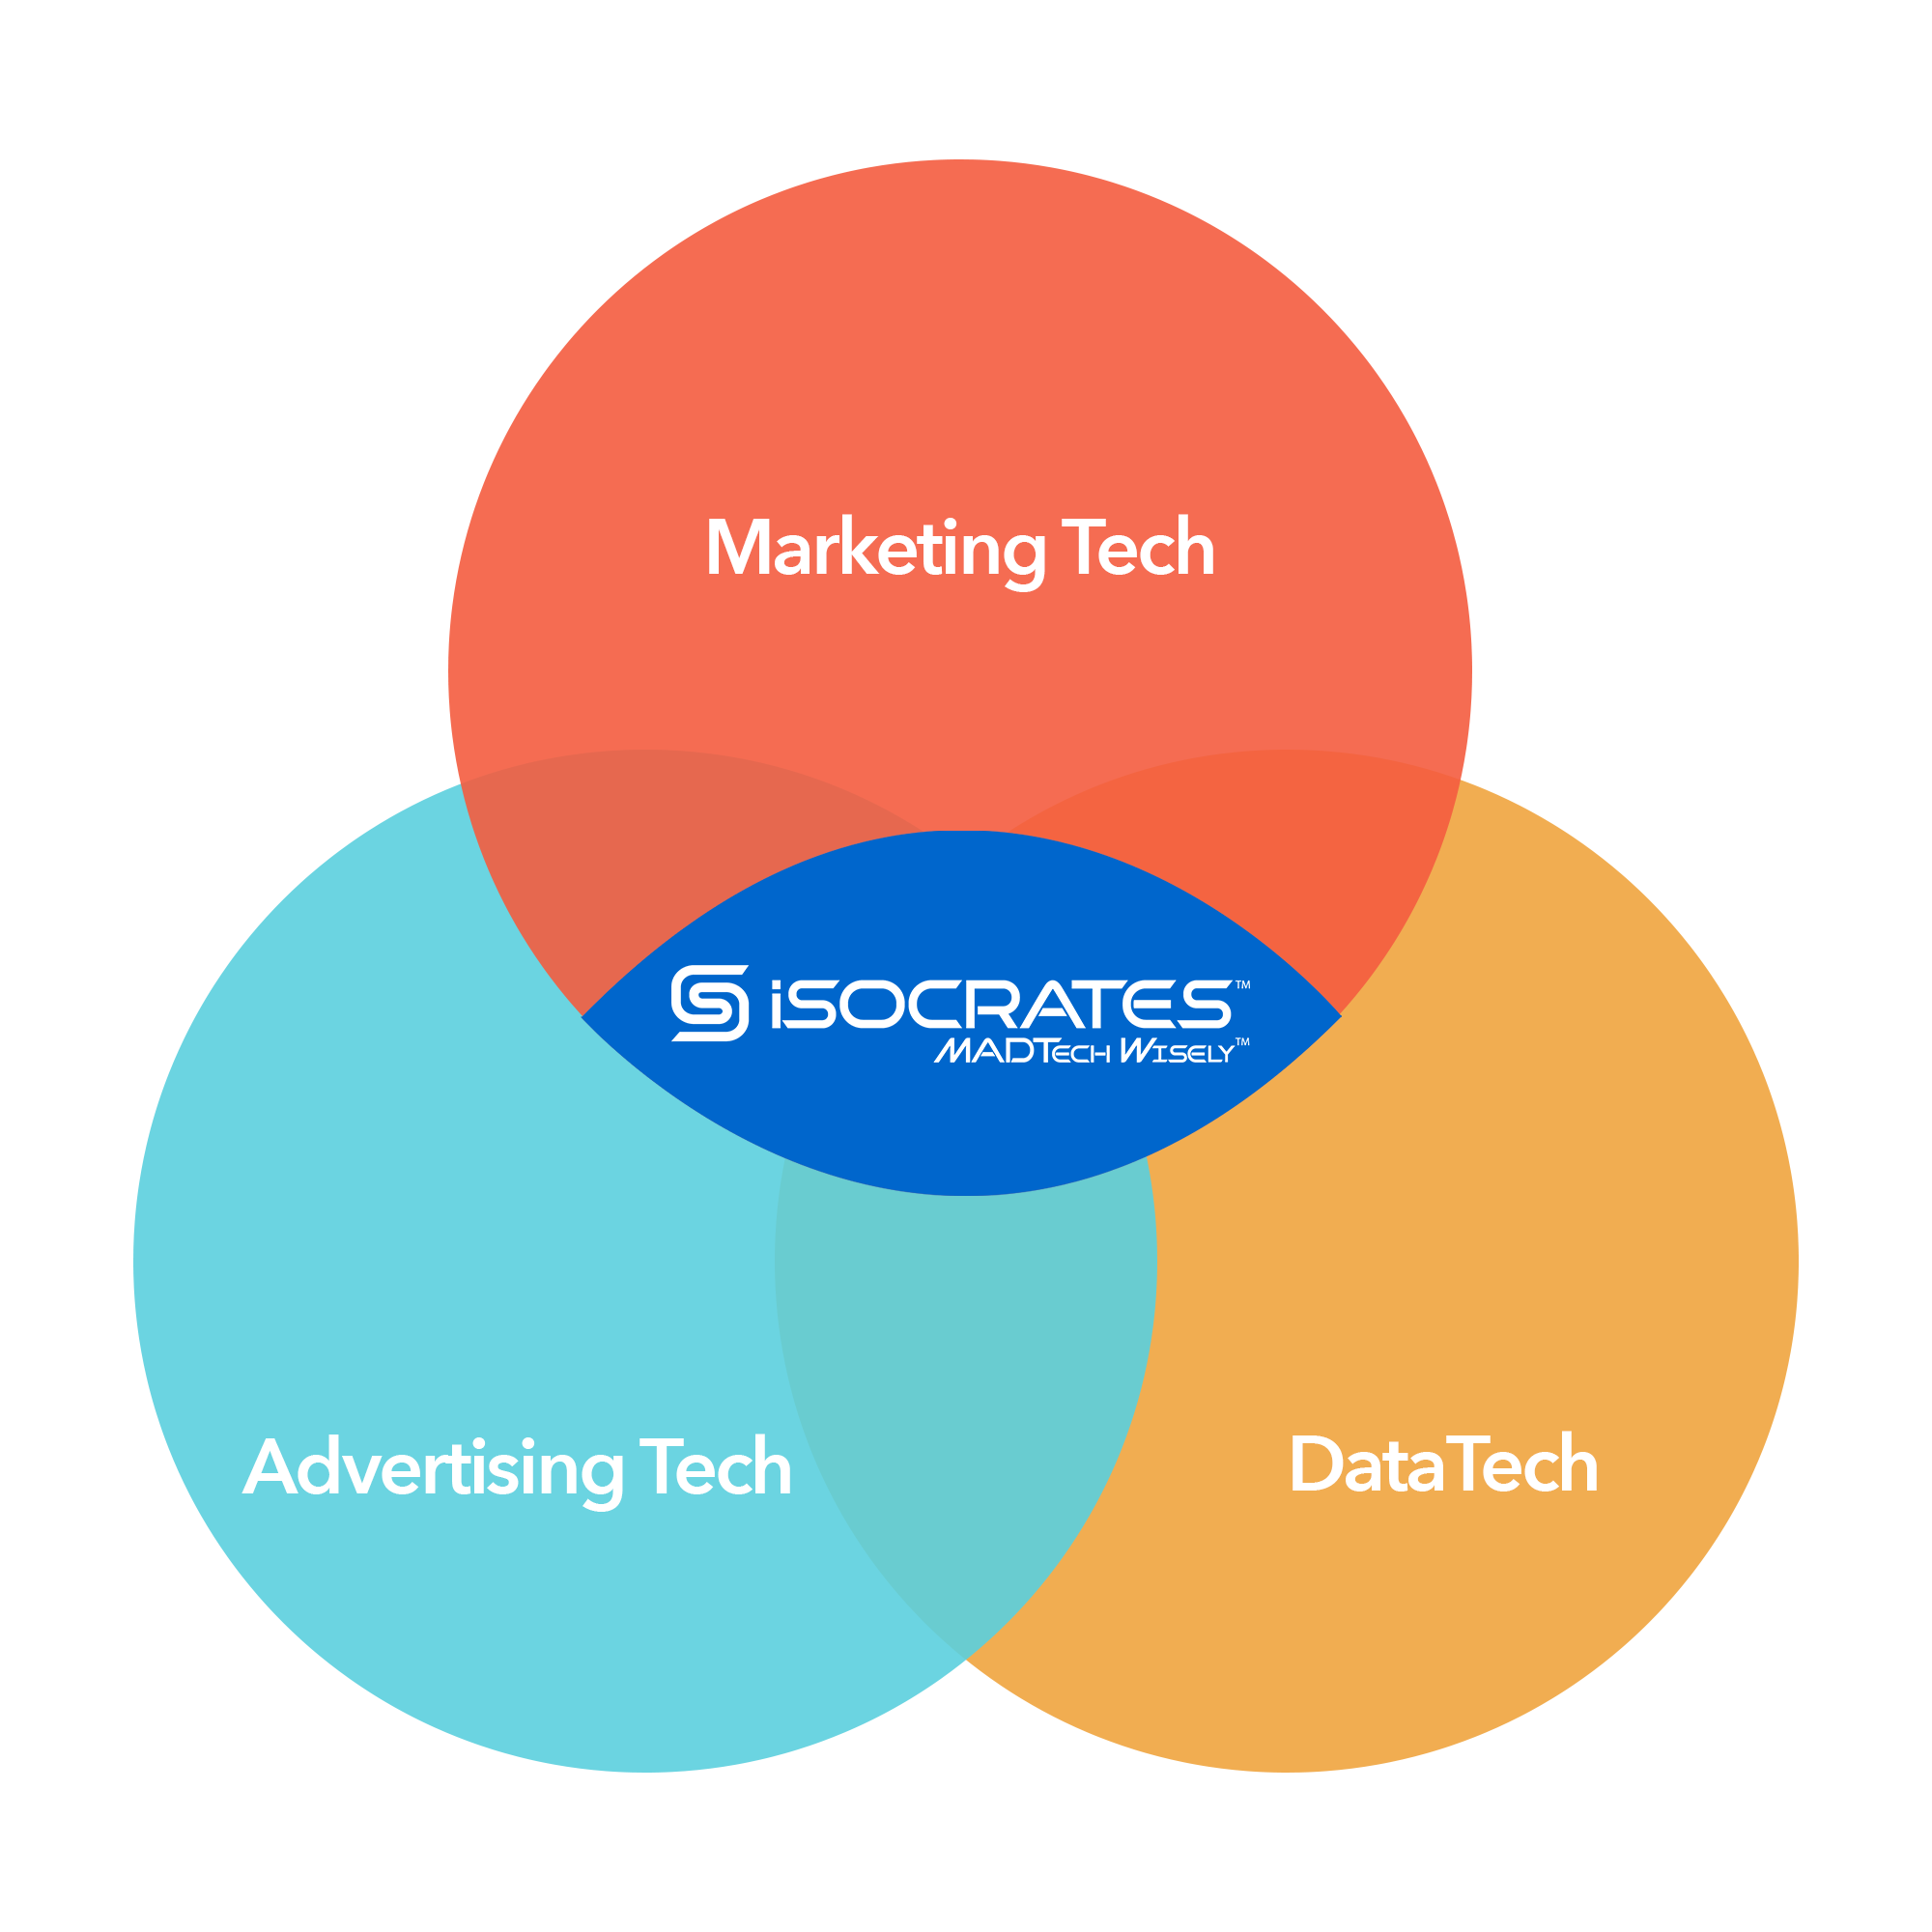 iSOCRATES-MADTech-Wisely-Venn-Diagram